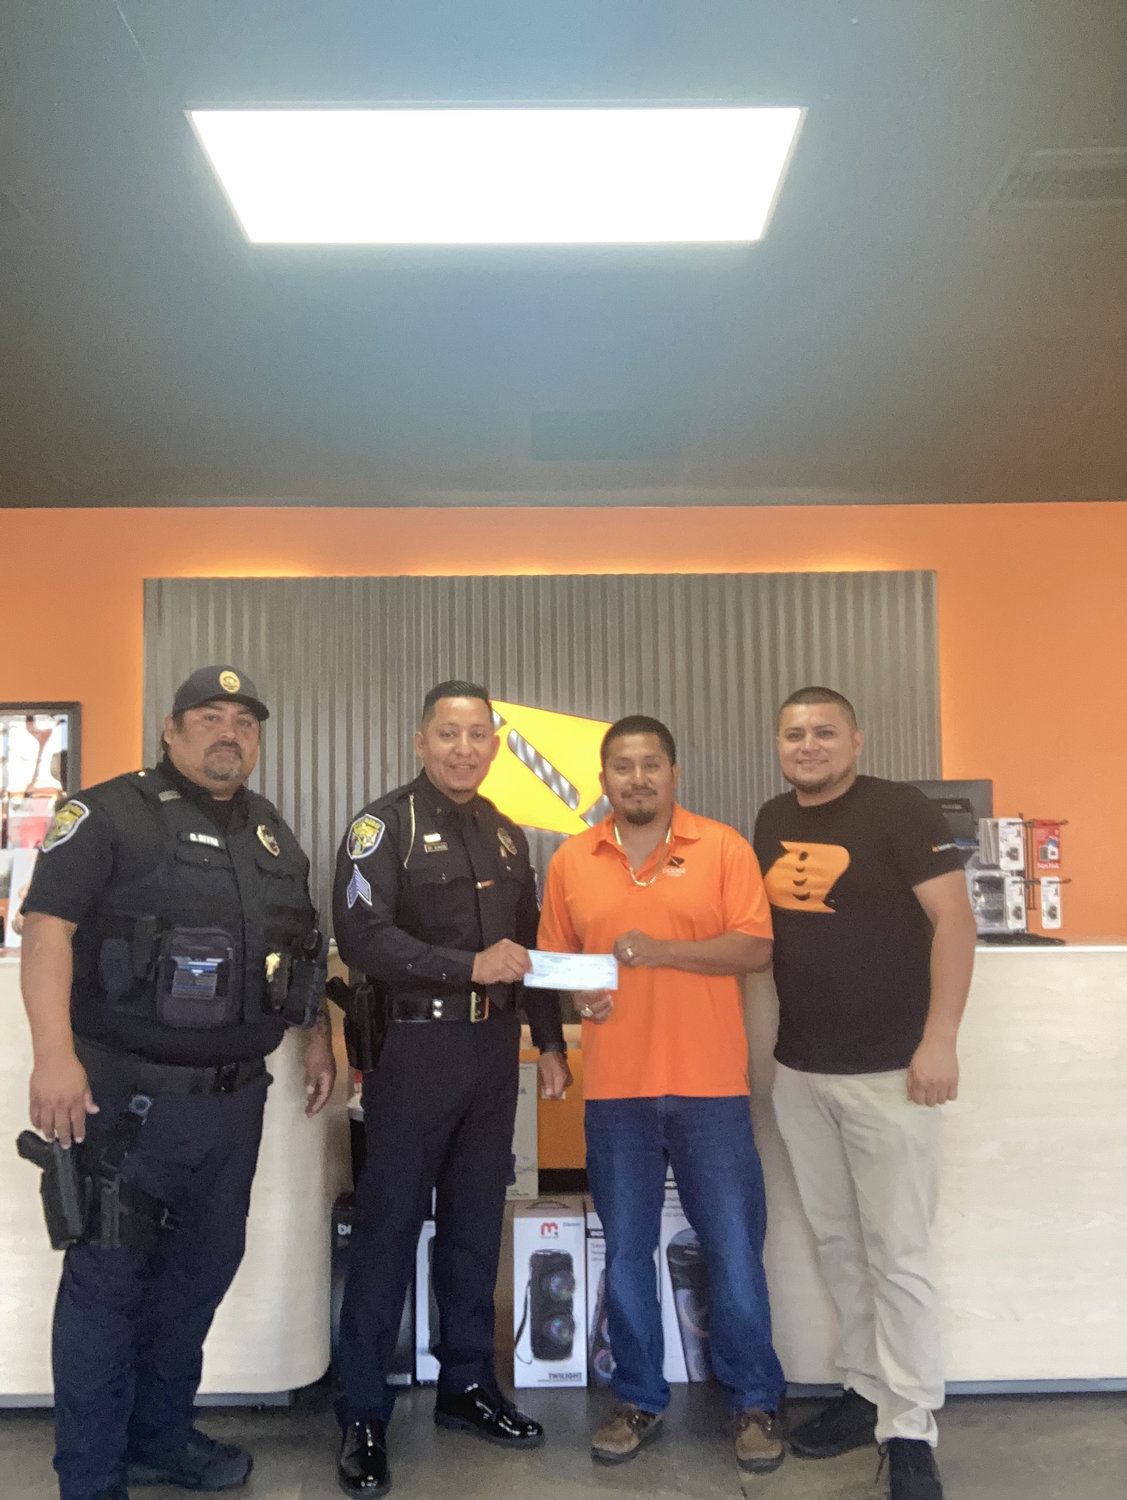 Owners of the Boost stores, Valentin Bautista and Ceferino Espinoza, donated a check to Okeechobee City Police to help cover cost of Honor Guard uniforms. Sgt. Almazan and Lt. Reyna accept the donation from the store owners.